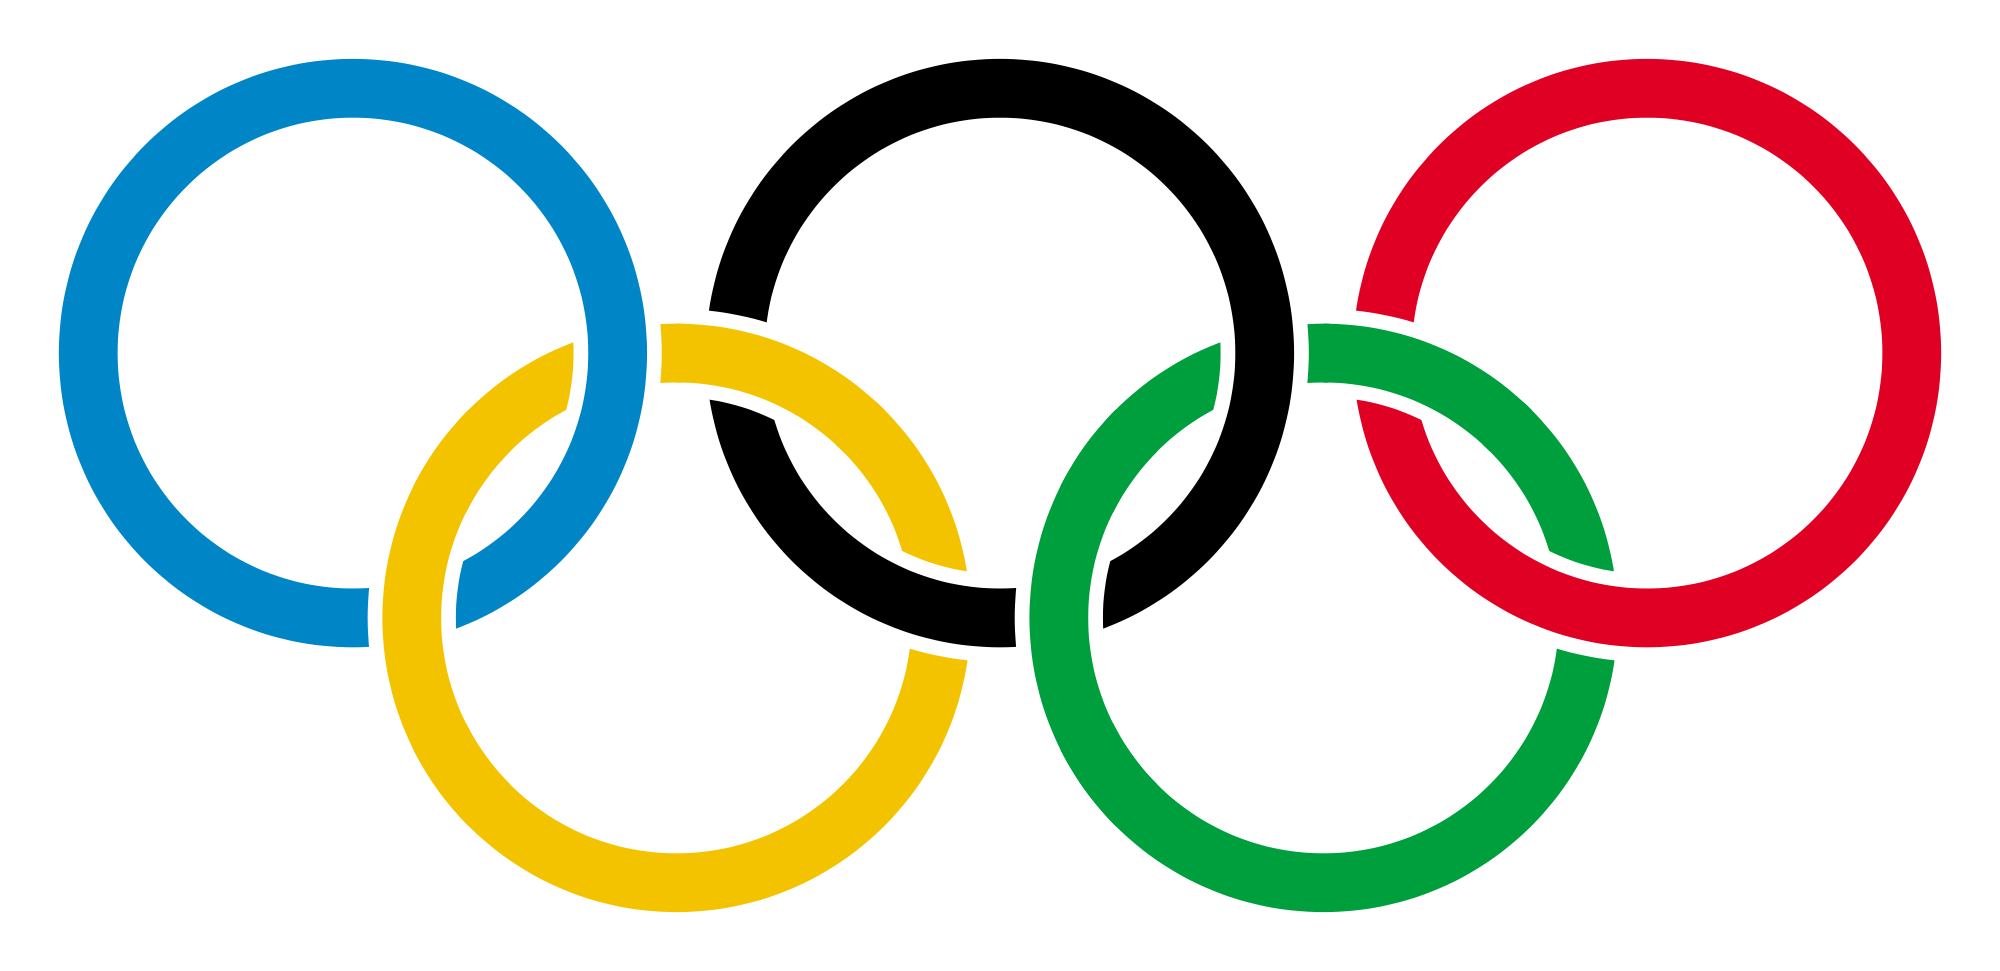 Olympic Rings PNG HD Transparent Olympic Rings HD.PNG Image